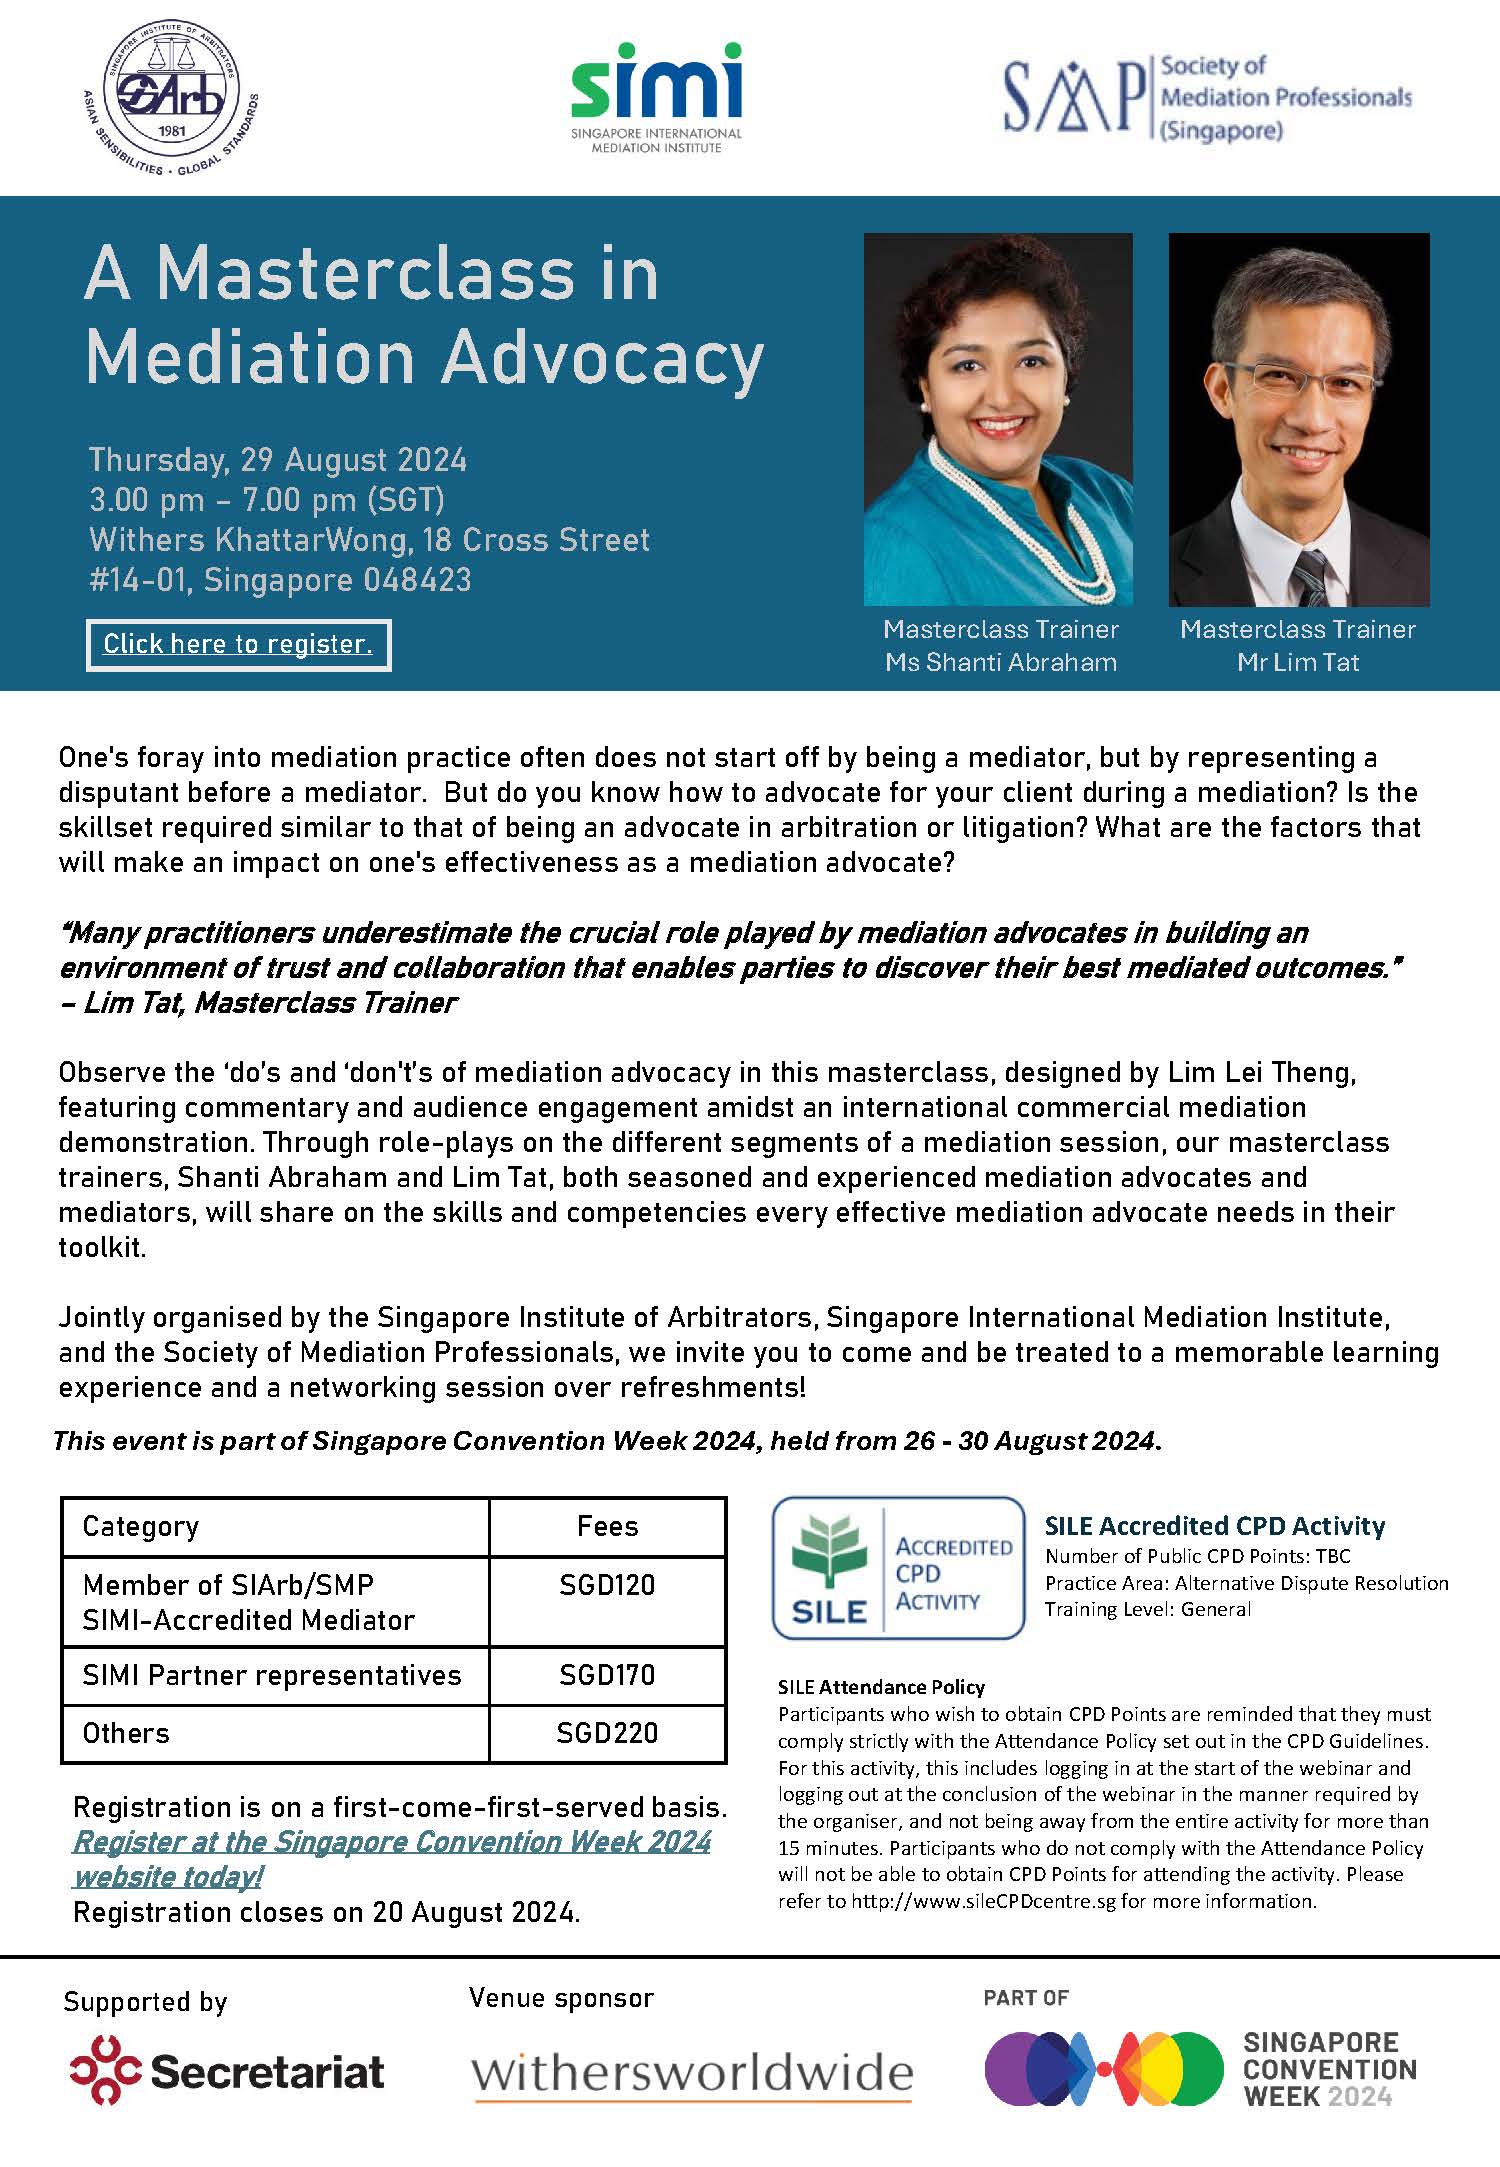 A Masterclass in Mediation Advocacy Flyer 24 July 2024 Page 1